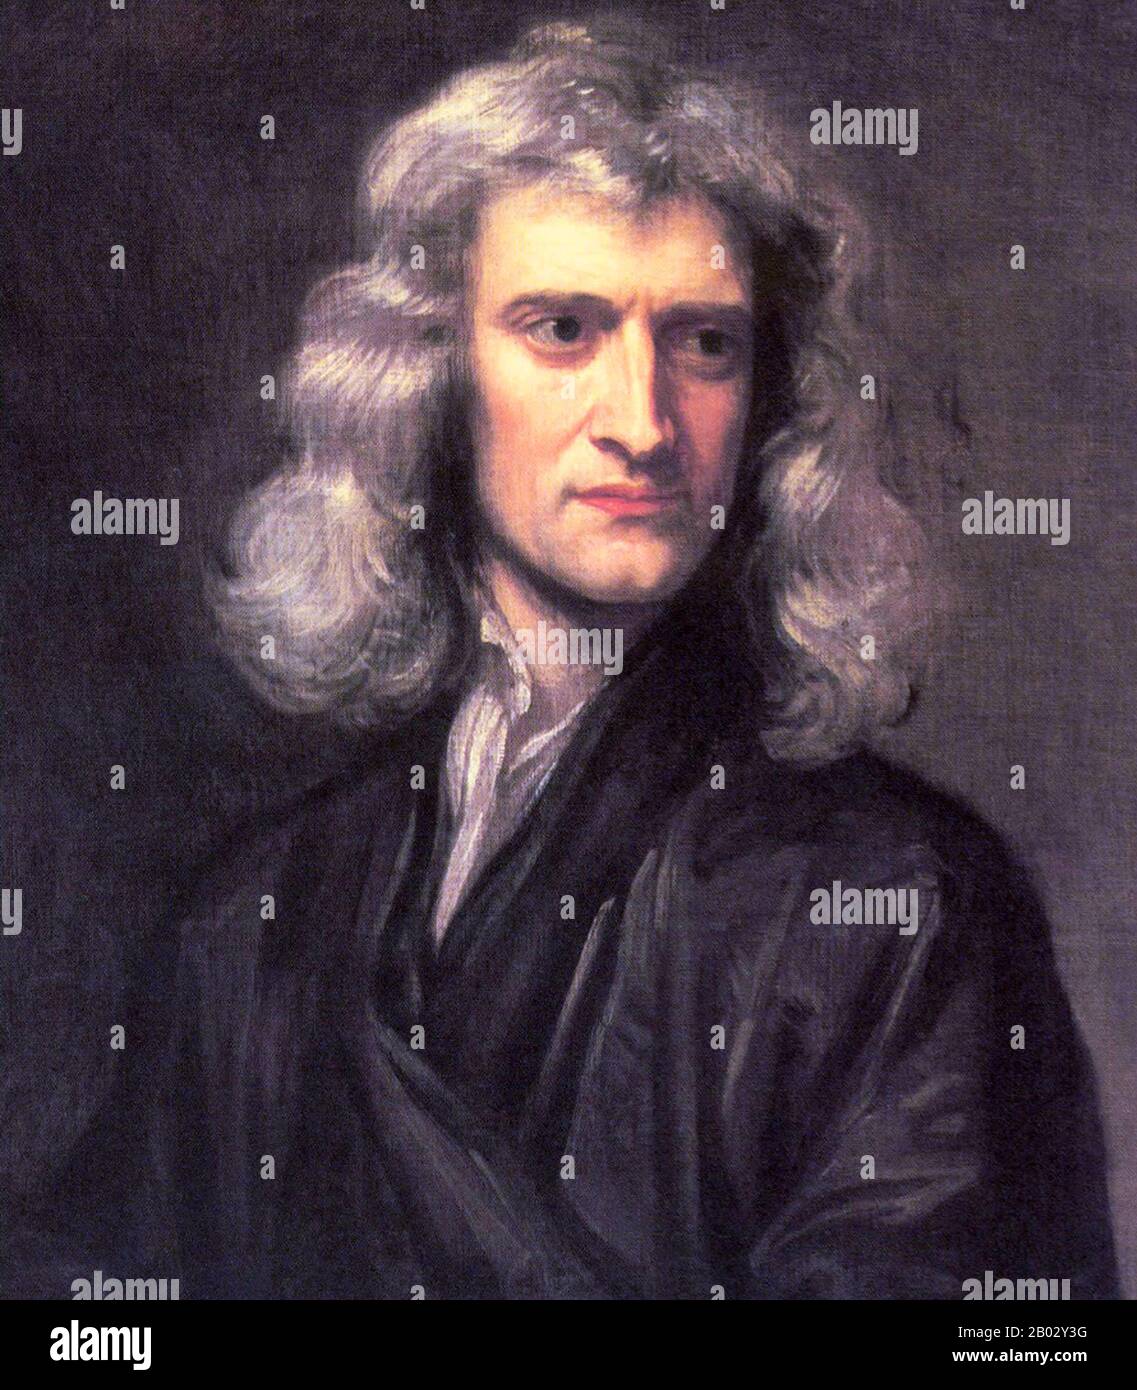 Sir Isaac Newton PRS MP (25 December 1642 – 20 March 1726)  was an English physicist and mathematician (described in his own day as a 'natural philosopher') who is widely recognised as one of the most influential scientists of all time and as a key figure in the scientific revolution.  His book Philosophiæ Naturalis Principia Mathematica ('Mathematical Principles of Natural Philosophy'), first published in 1687, laid the foundations for classical mechanics. Newton made seminal contributions to optics, and he shares credit with Gottfried Leibniz for the development of calculus. Stock Photo